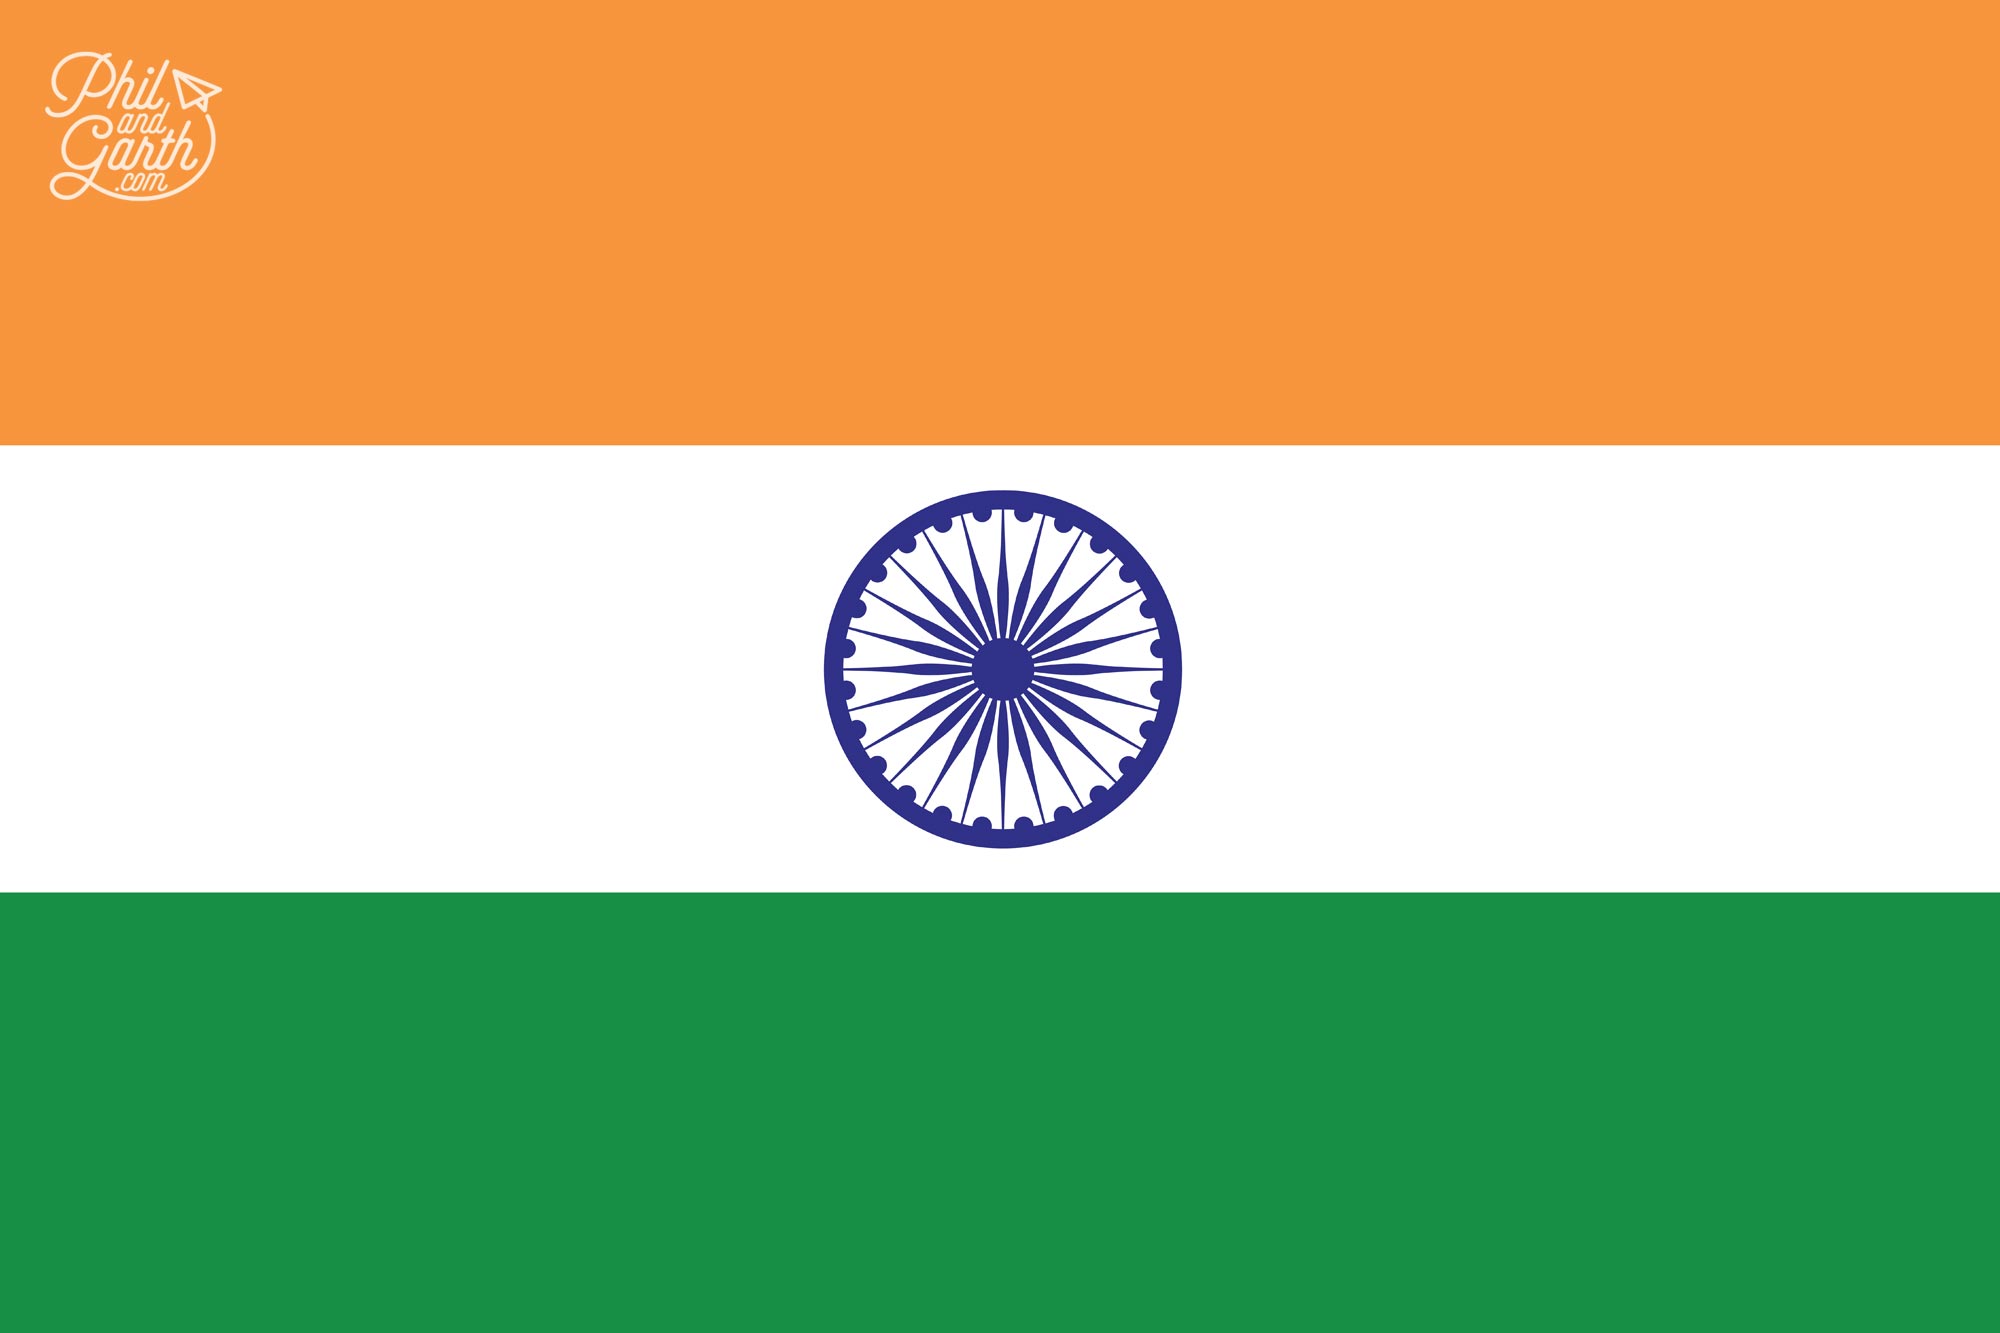 National flag of India with the Ashoka Chakra wheel in the middle coloured in navy blue